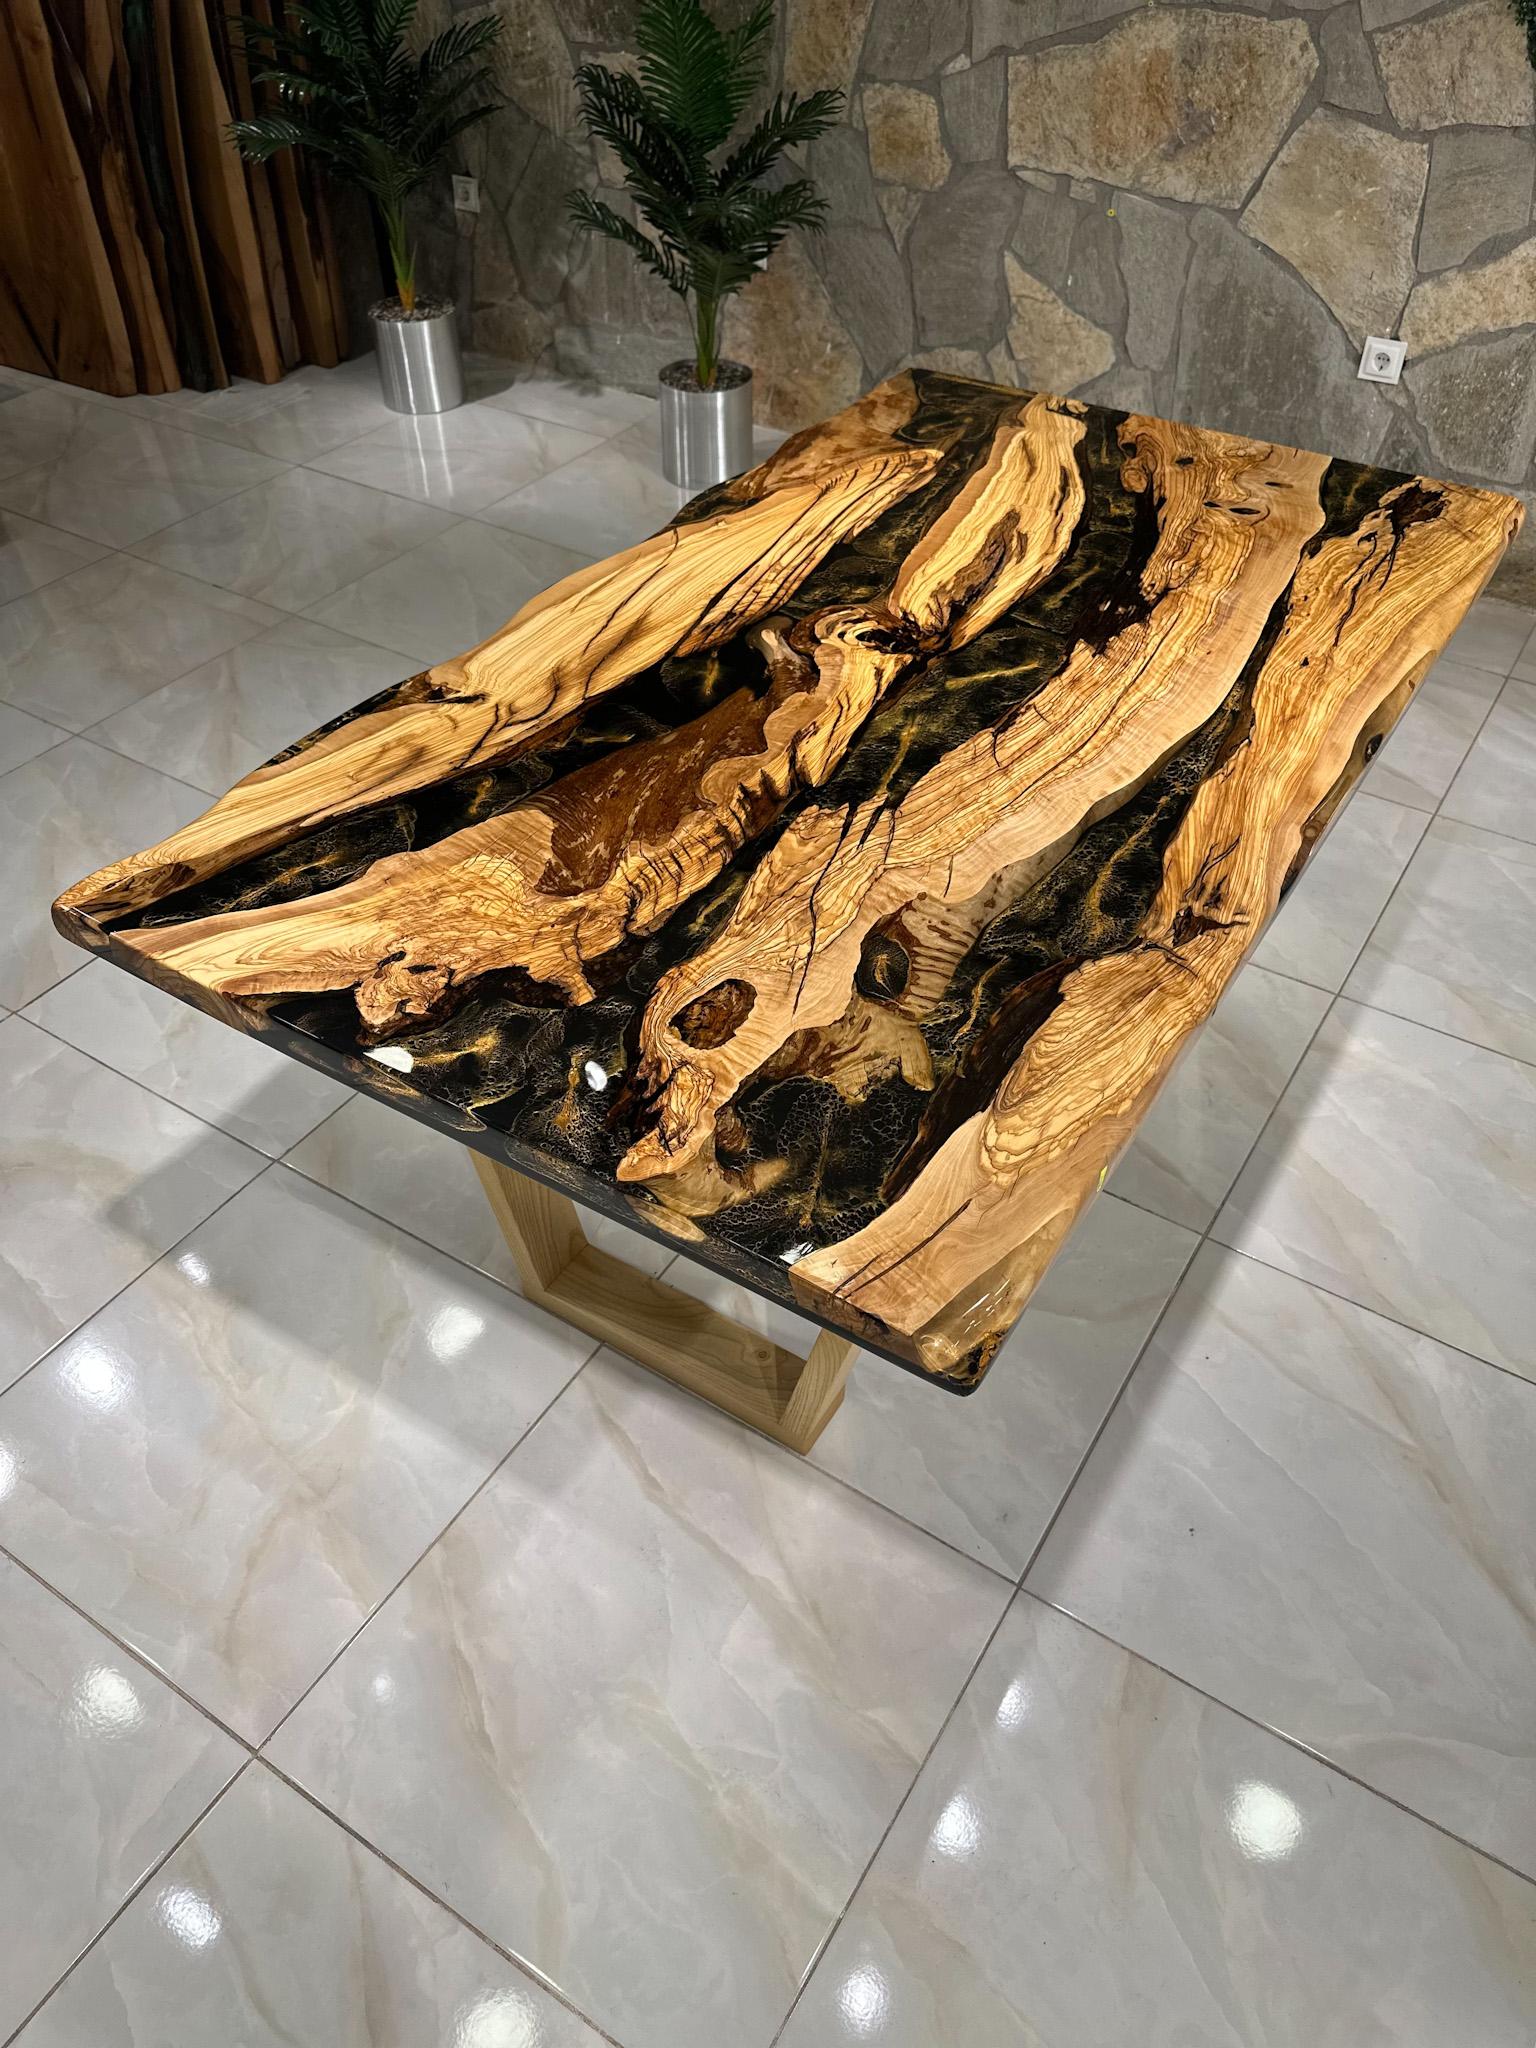 Olive Wood Live Edge Resin Table - Dining Custom Table - Kitchen Table In New Condition For Sale In İnegöl, TR